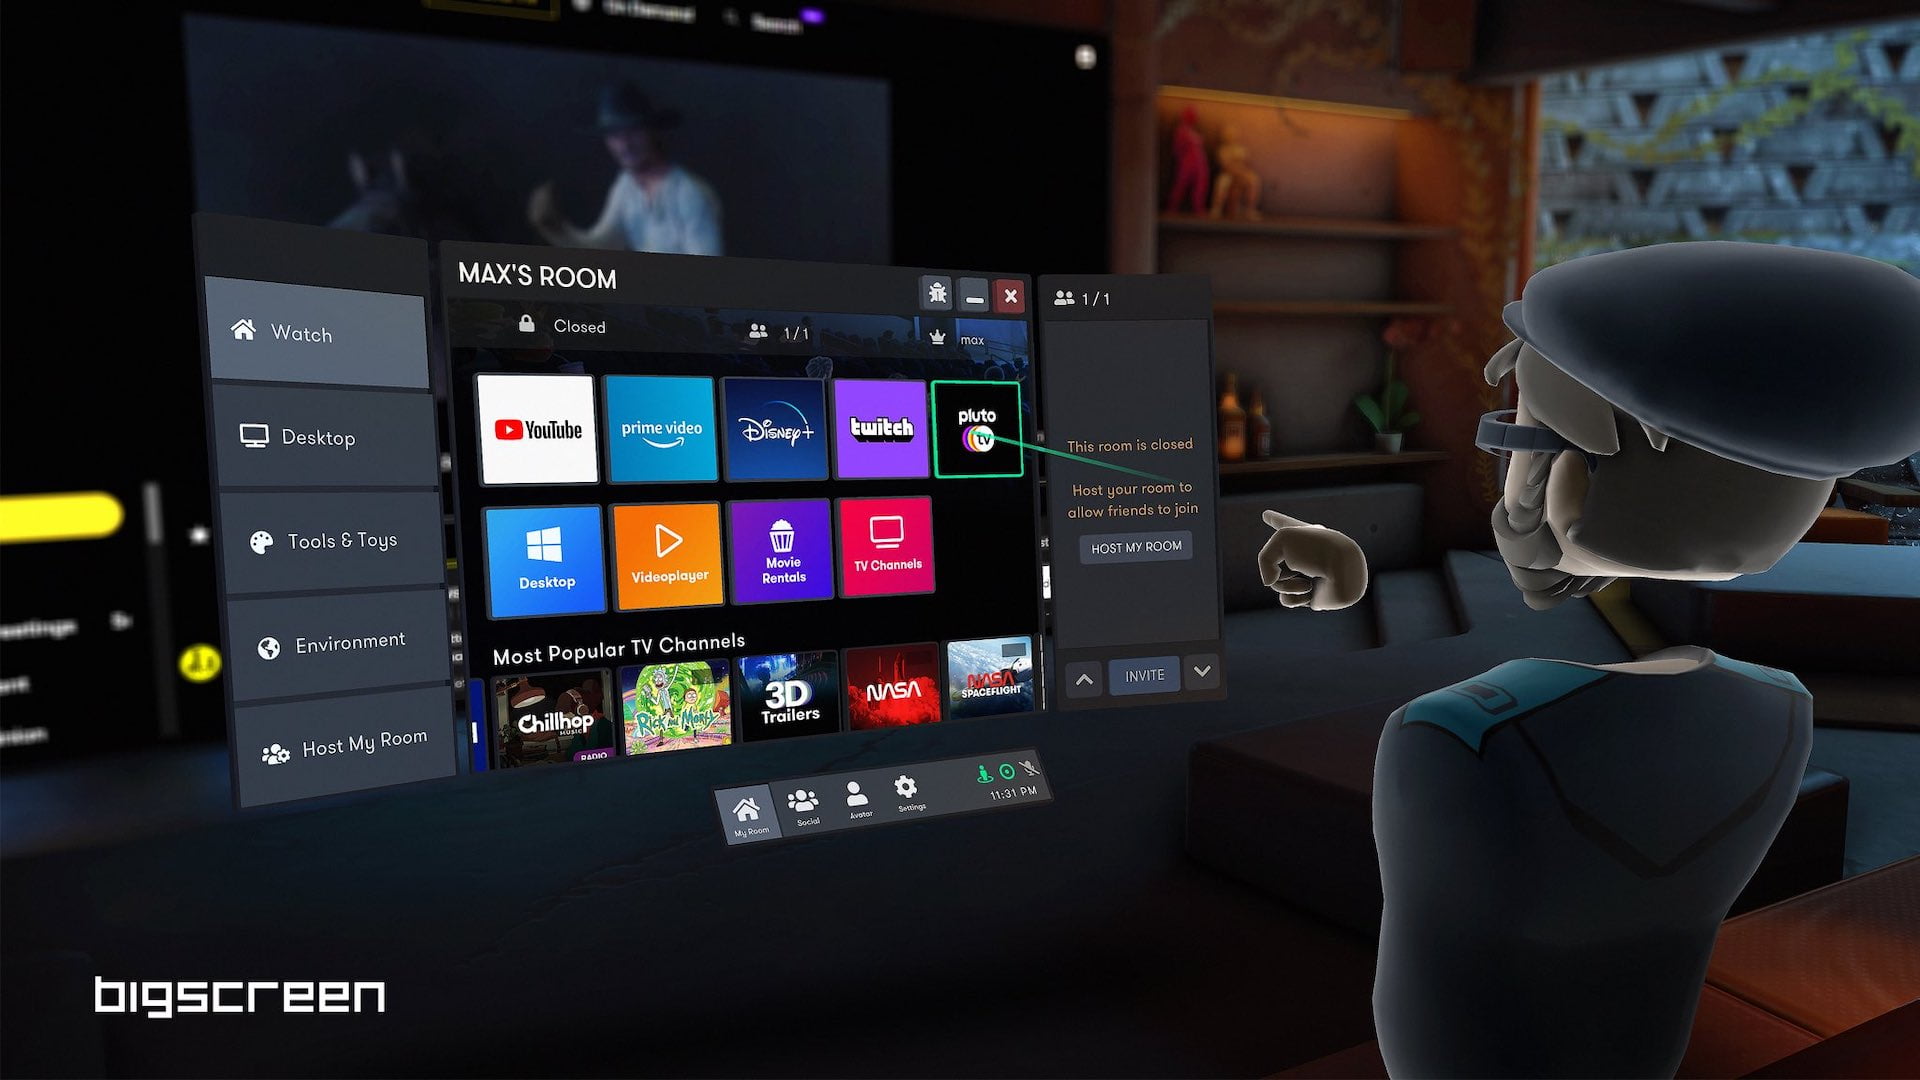 VR cinema app "Bigscreen" now with Amazon Prime, Disney+ and more